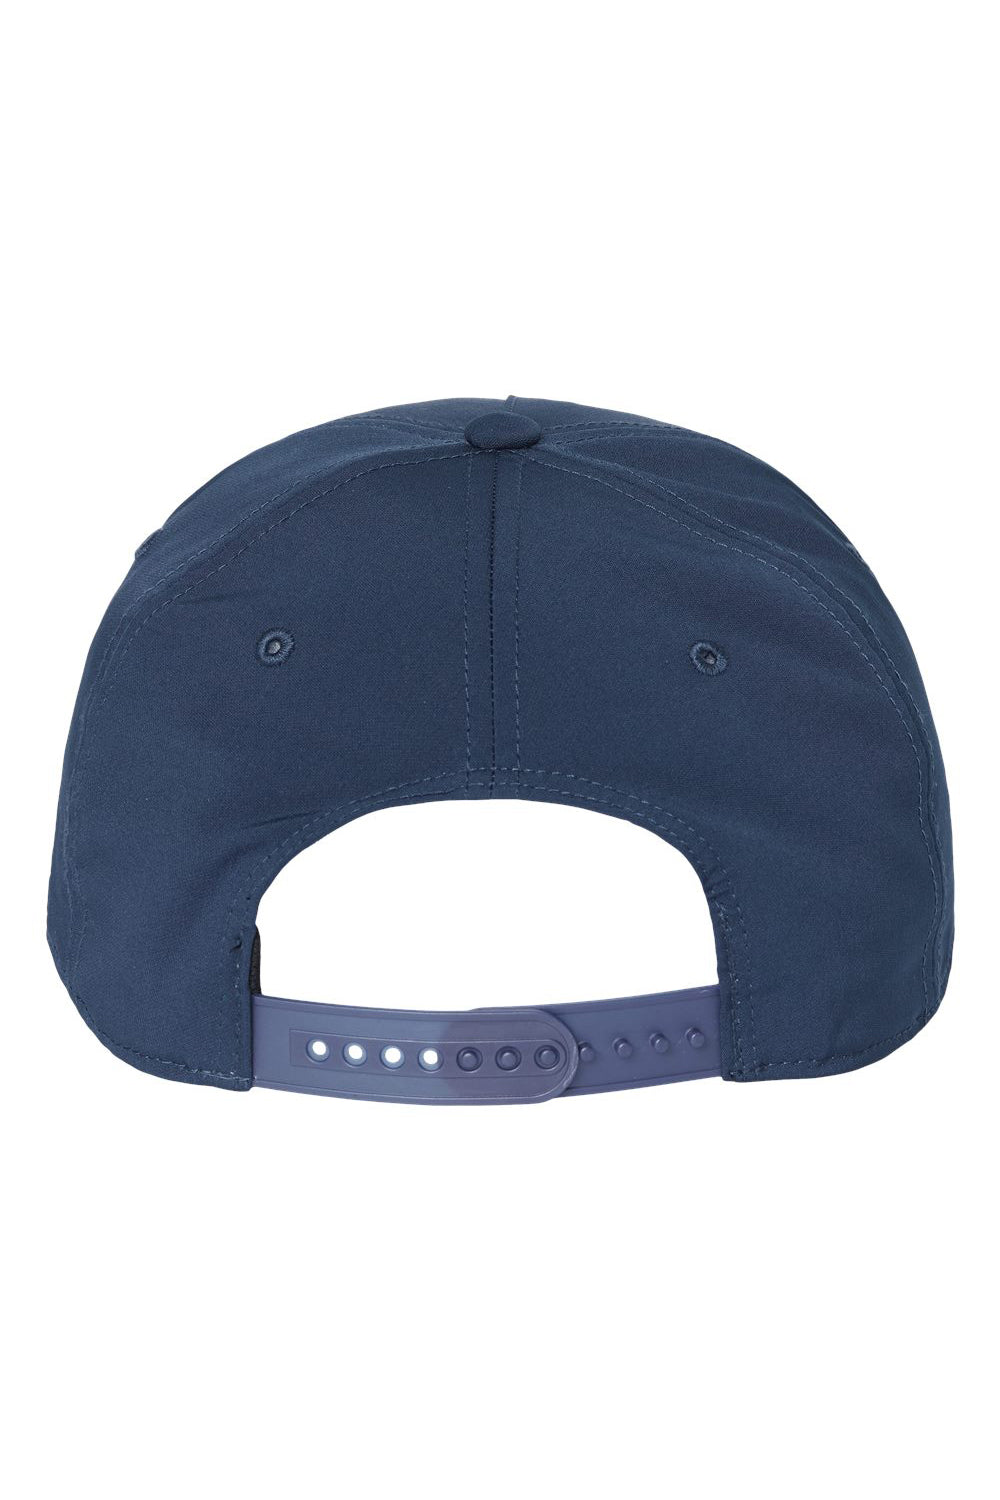 Adidas A671S Mens Sustainable Moisture Wicking Rope Snapback Hat Collegiate Navy Blue Flat Back